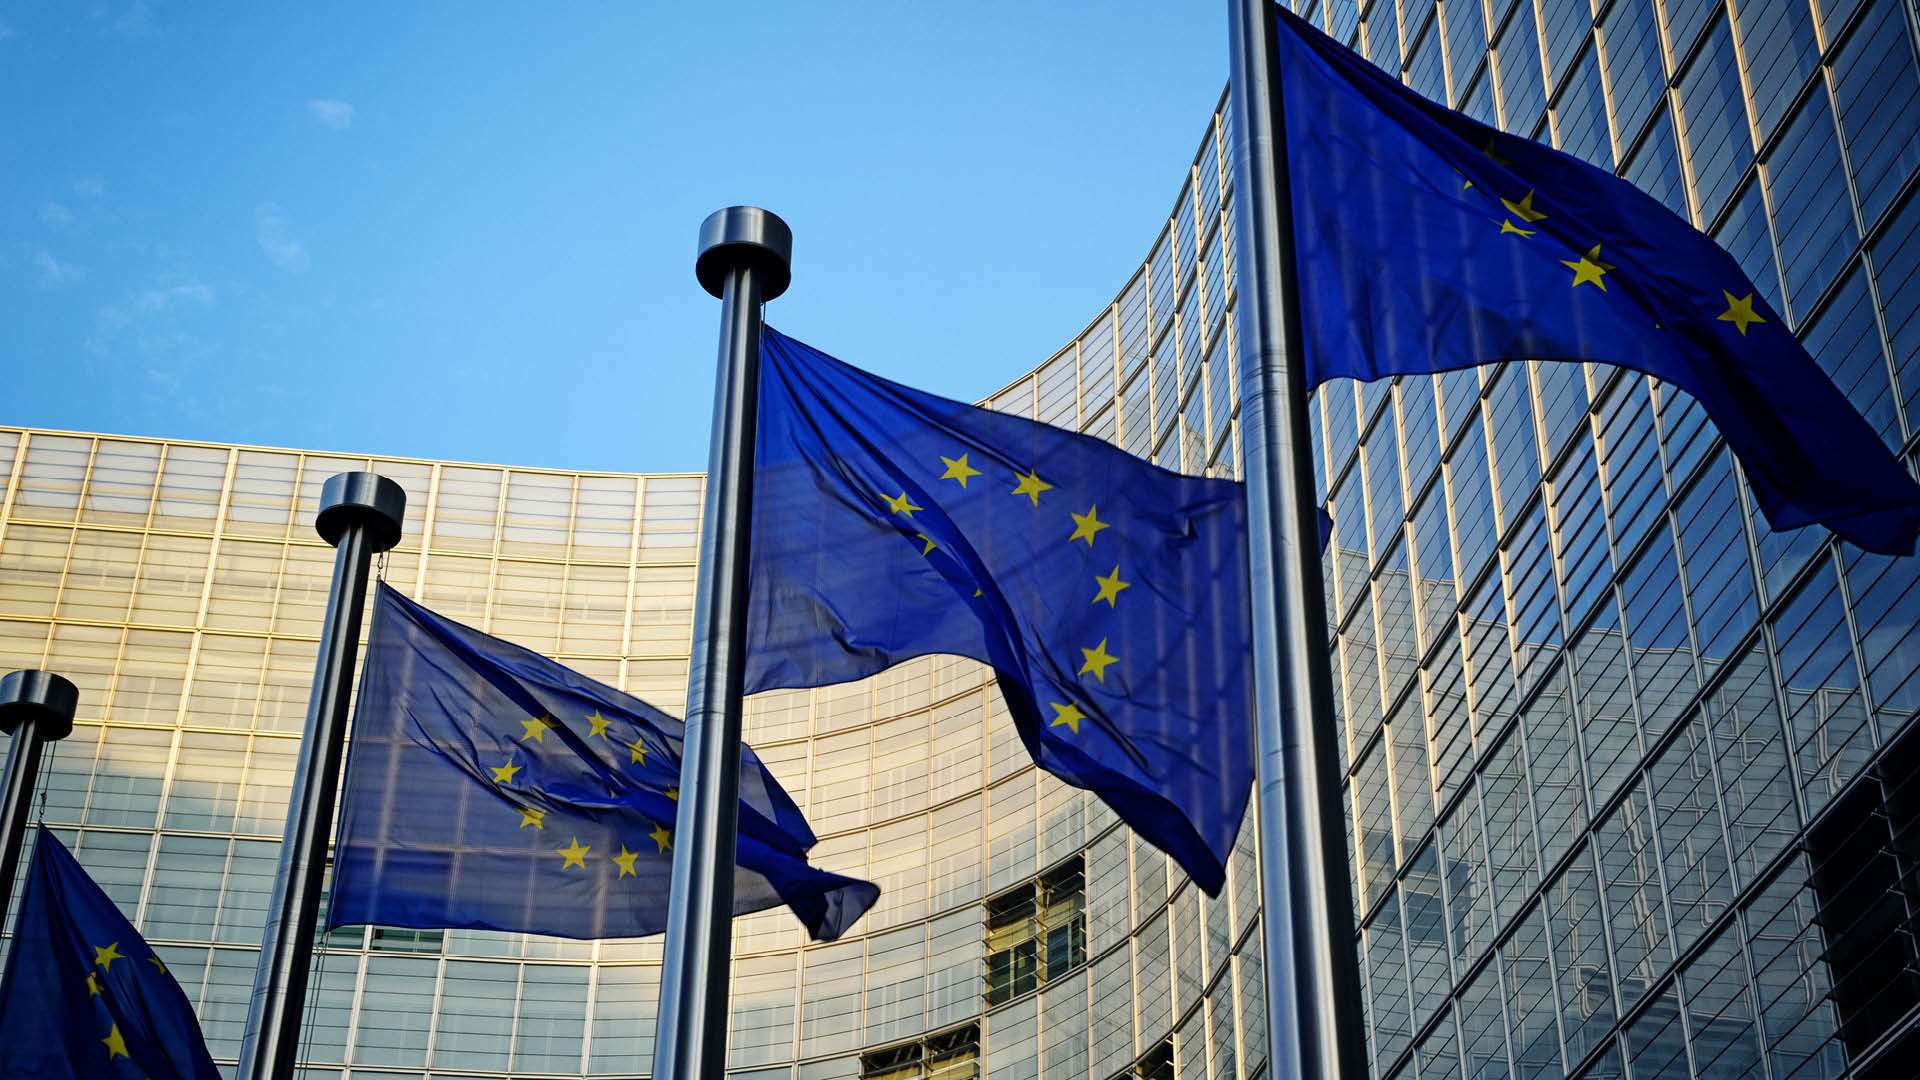 The European Commission’s Cartel Enforcement Policy and Practice: Current Trends